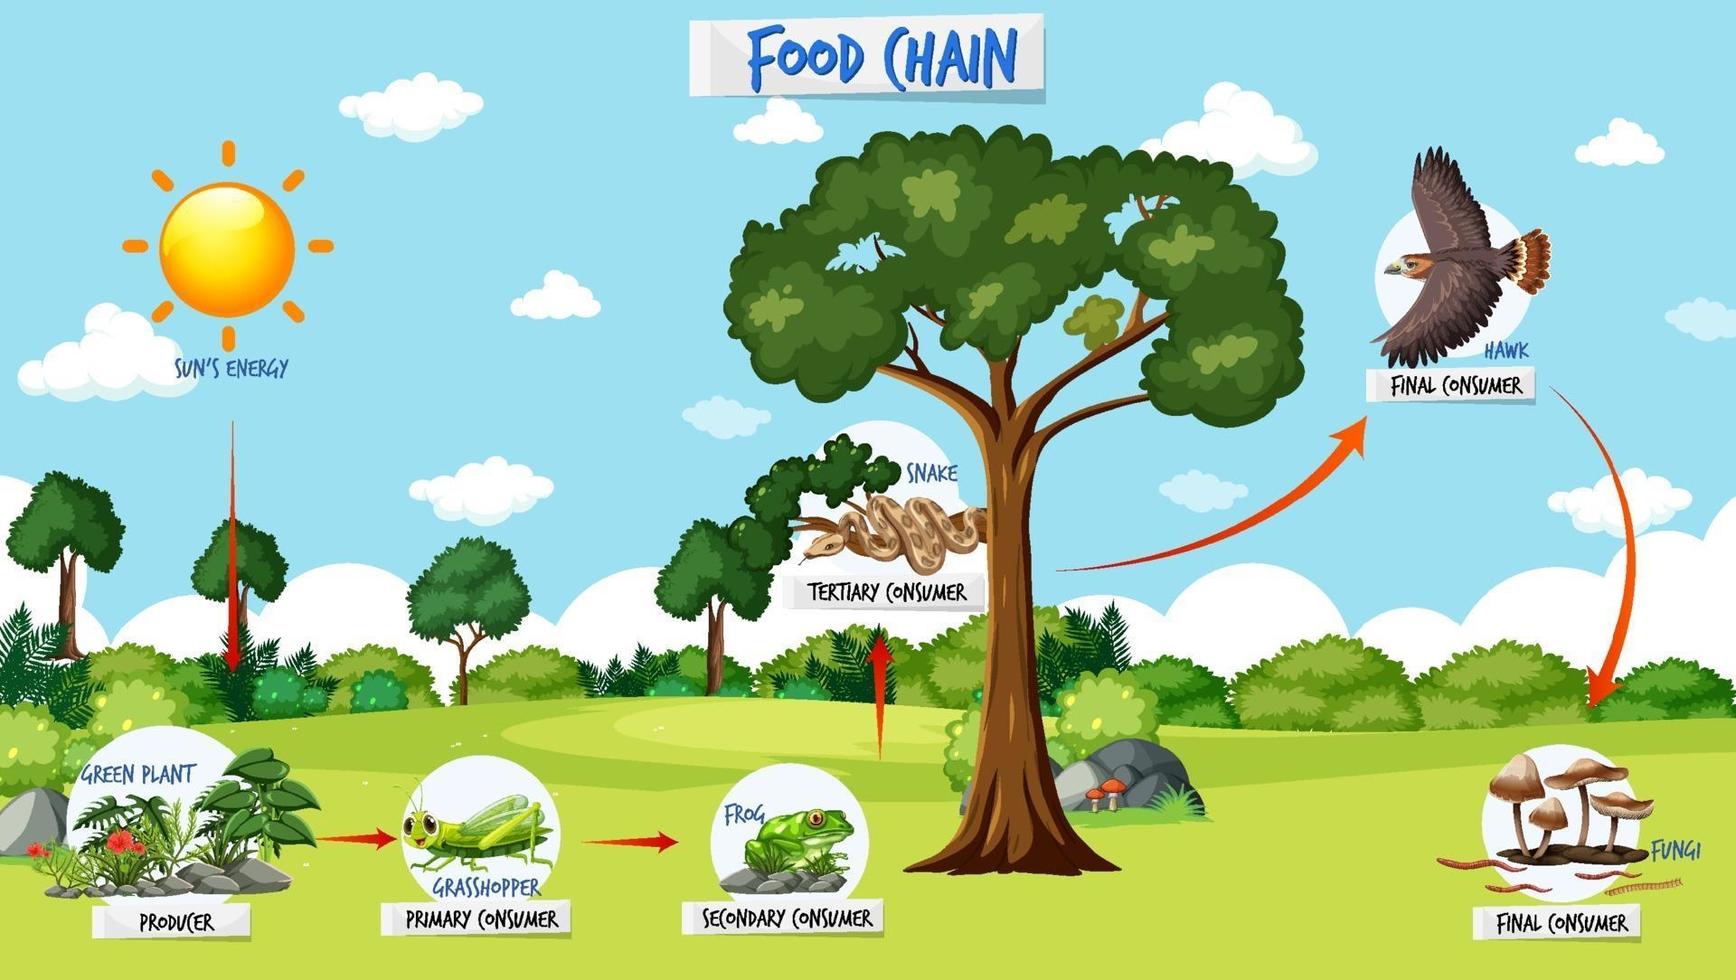 Food chain diagram concept on forest background vector